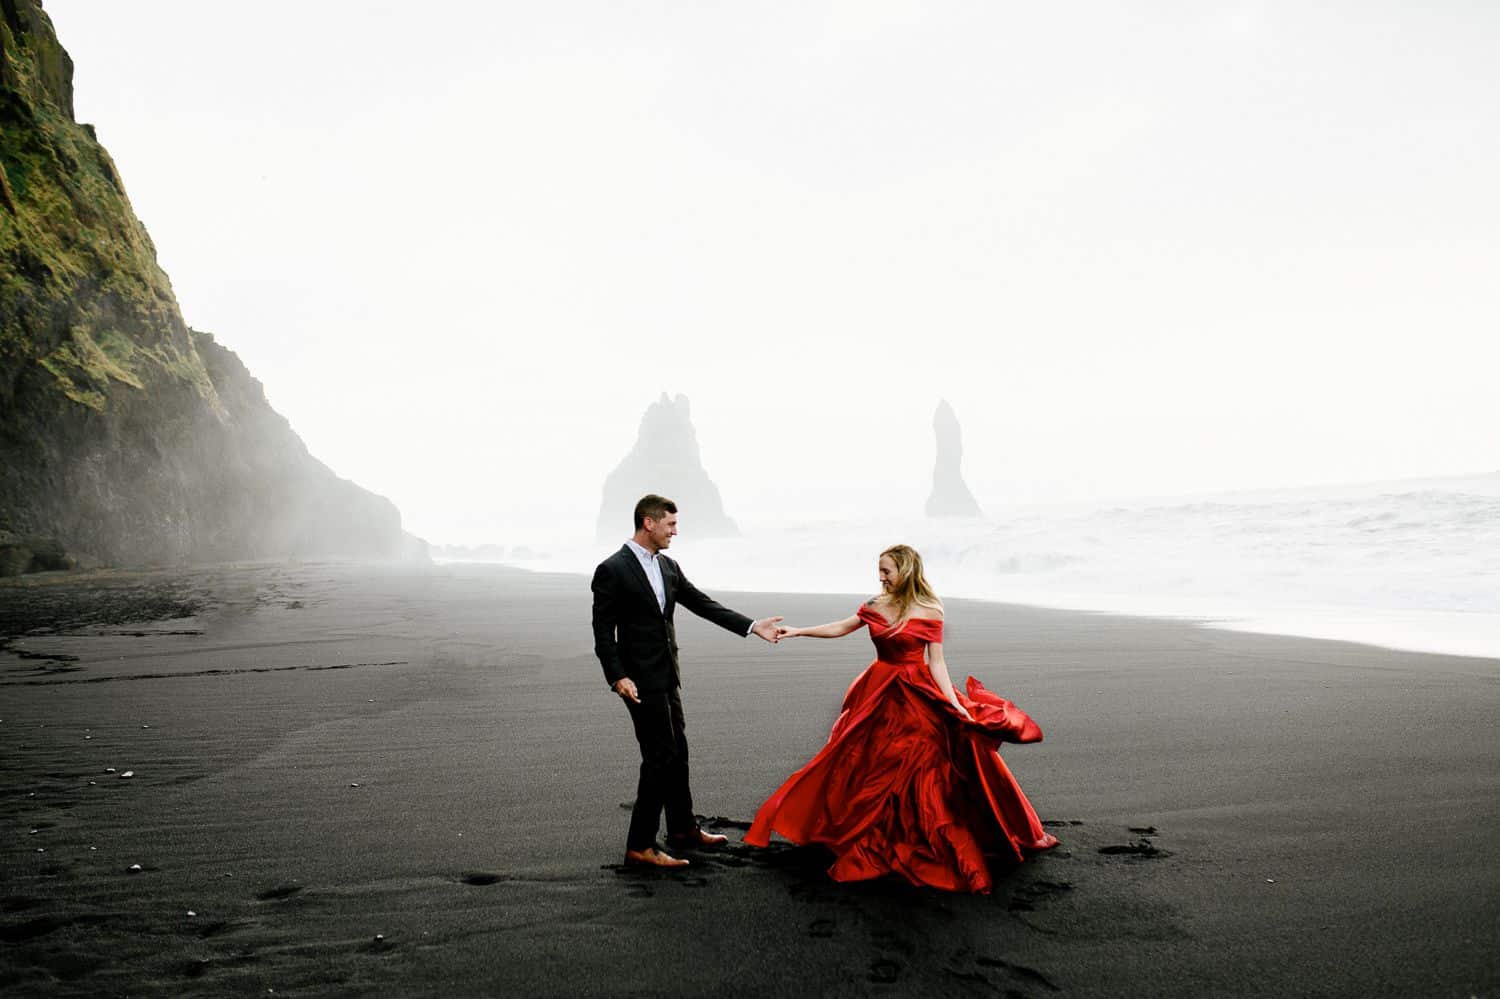 Man in a suit dances with woman in a red dress on the black sands of Iceland